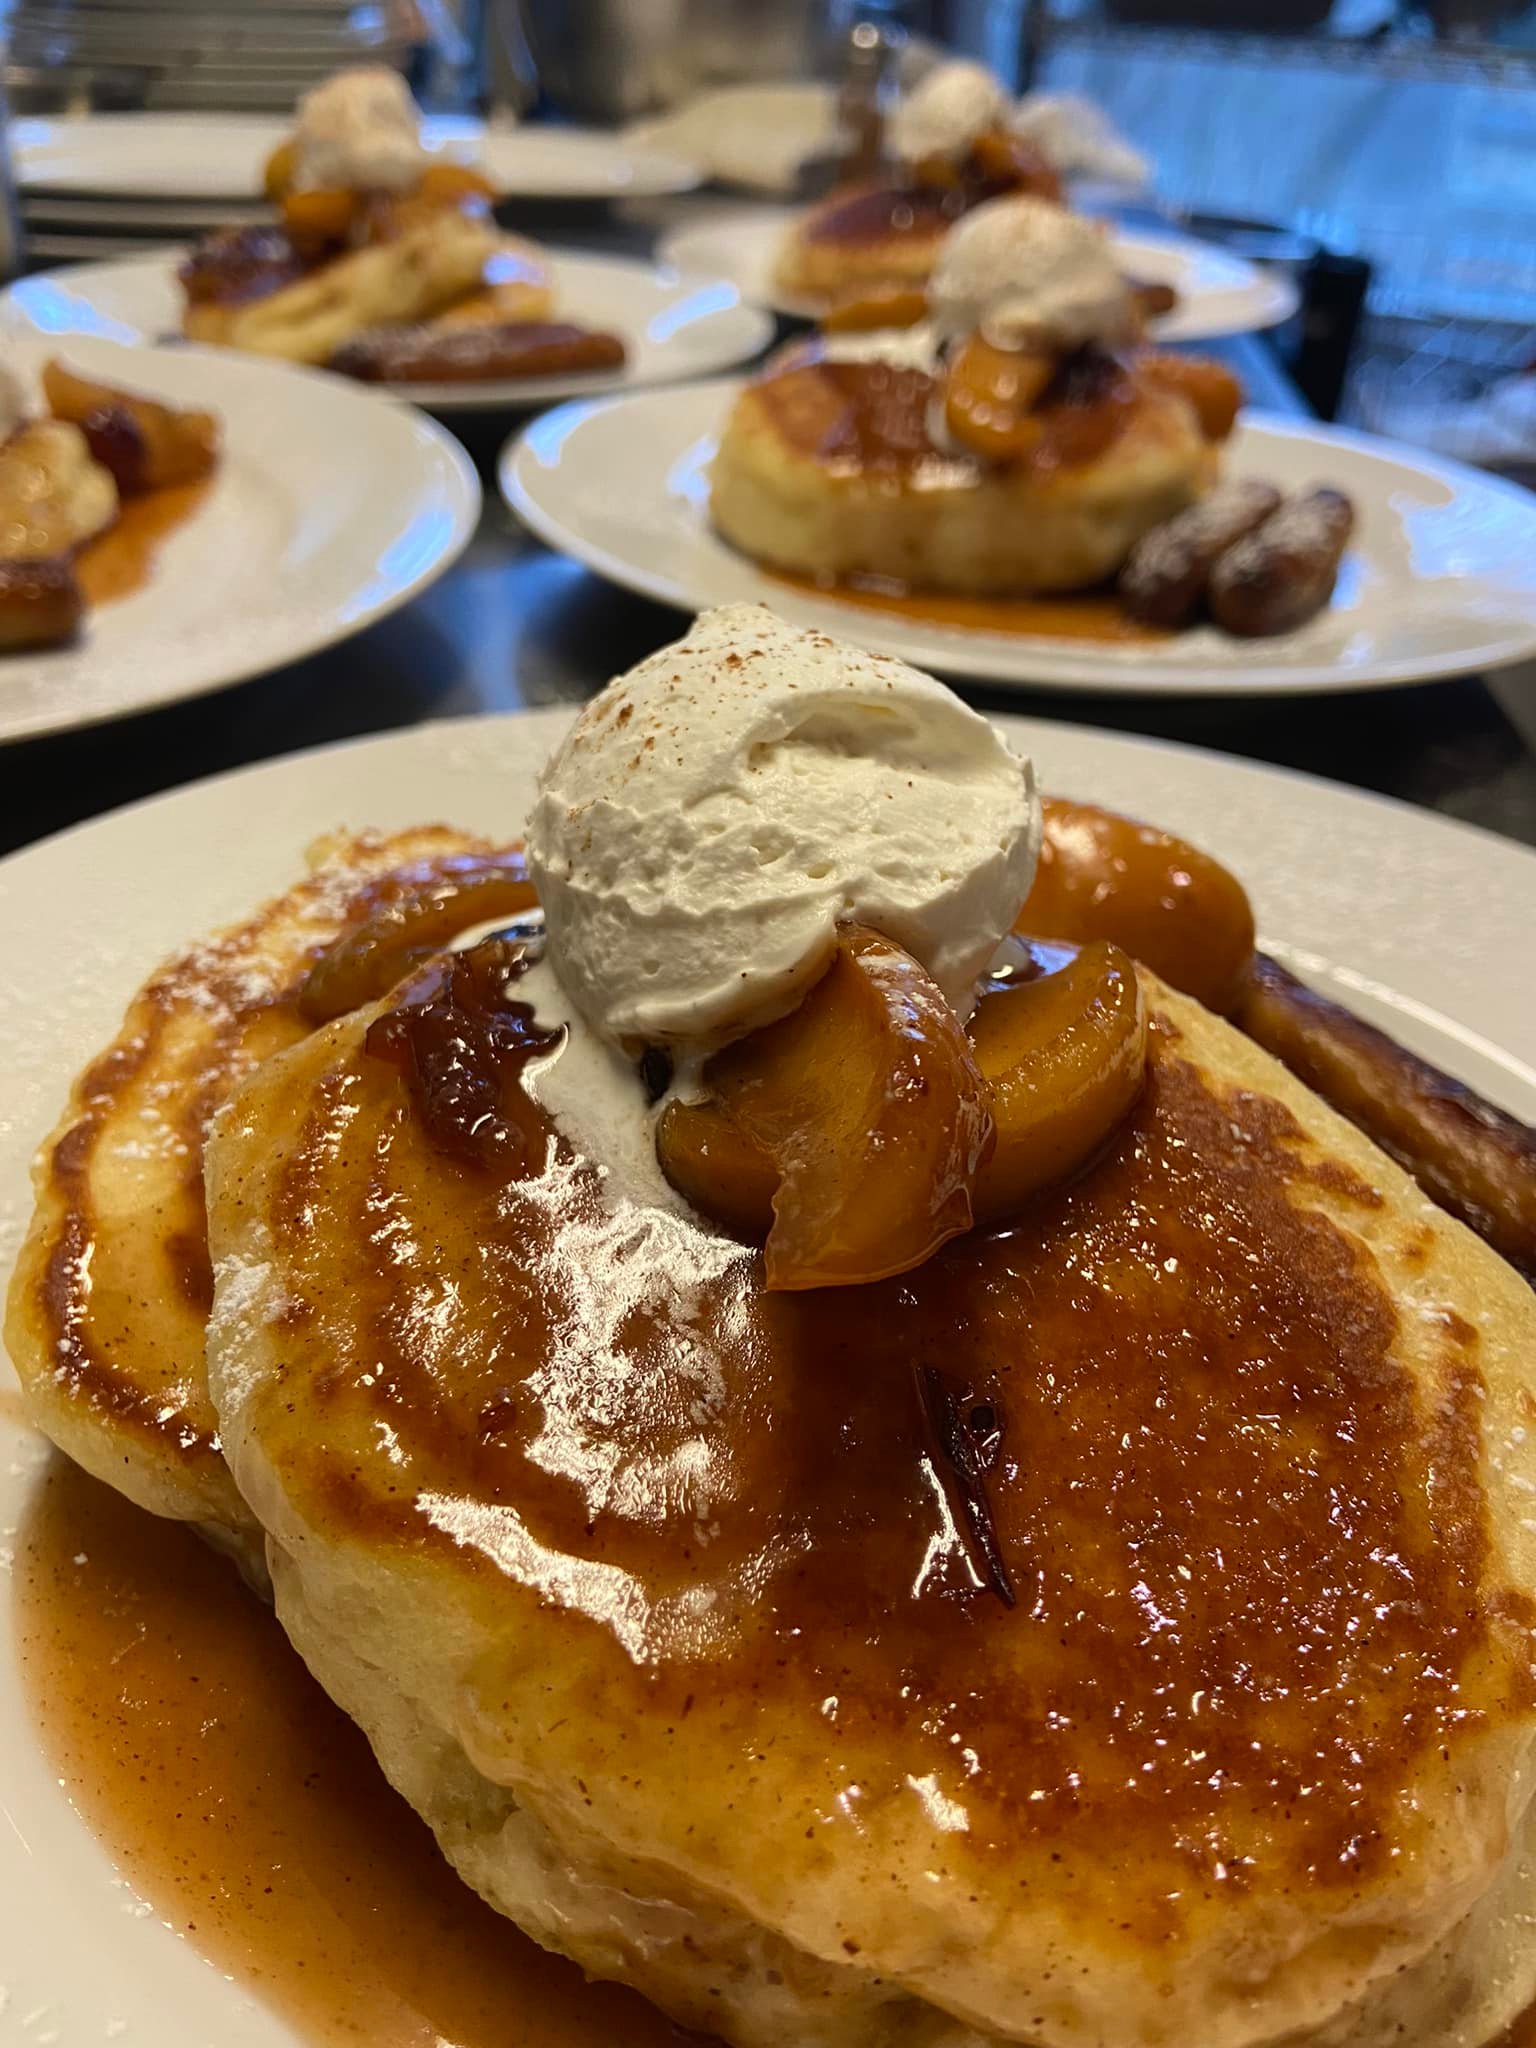 Holiday apples and cinnamon buttermilk sky high pancakes with nutmeg whipped cream.